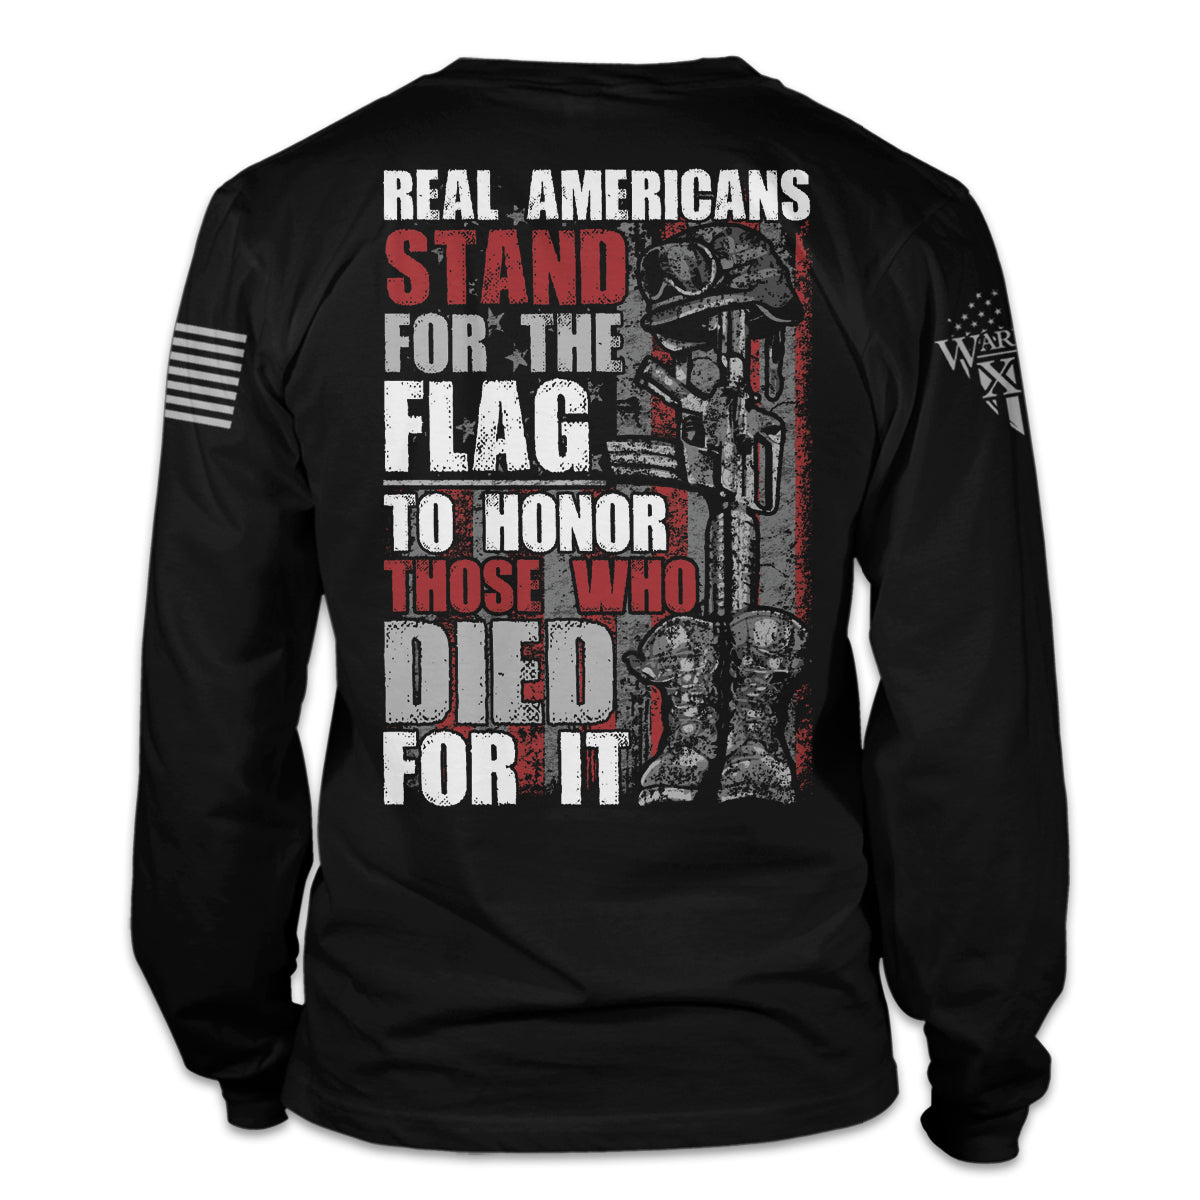 A black long sleeve shirt with the words "Real Americans Stand For The Flag To Honor Those Who Died For It!" printed on the back of the shirt.